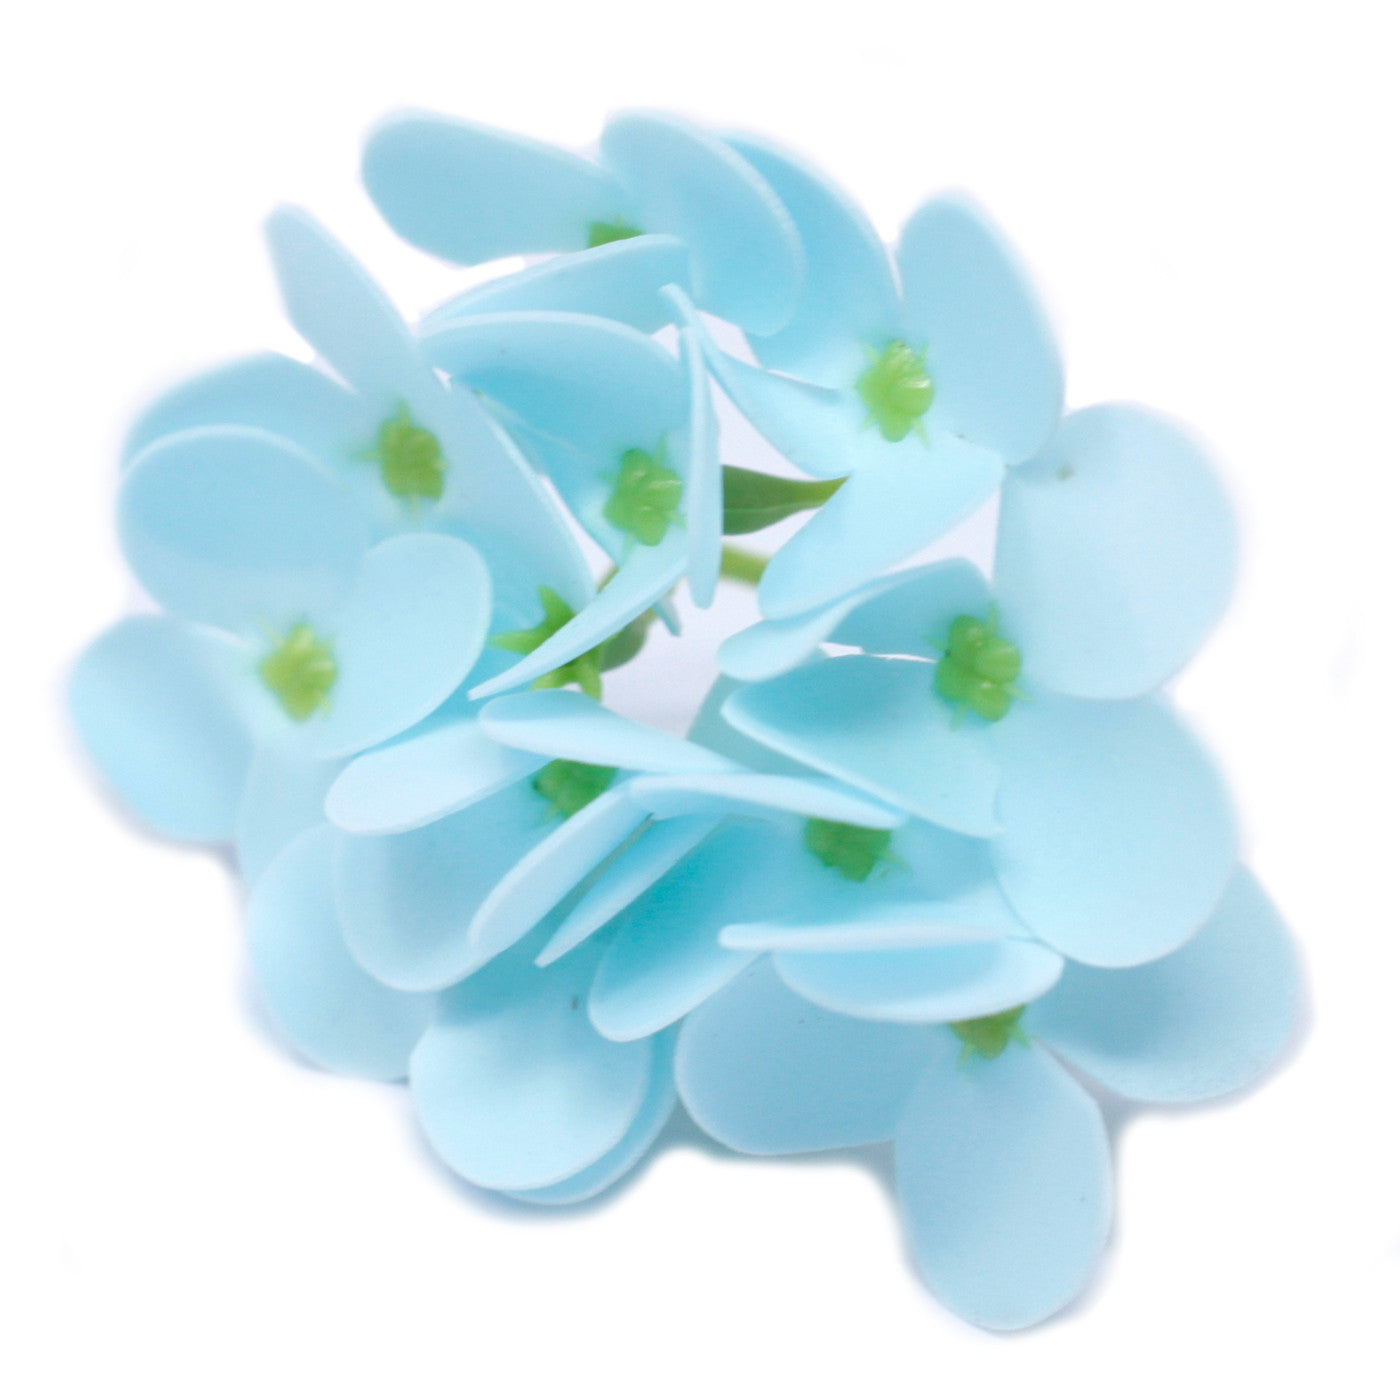 View Craft Soap Flowers Hyacinth Bean Baby Blue x 10 pcs information